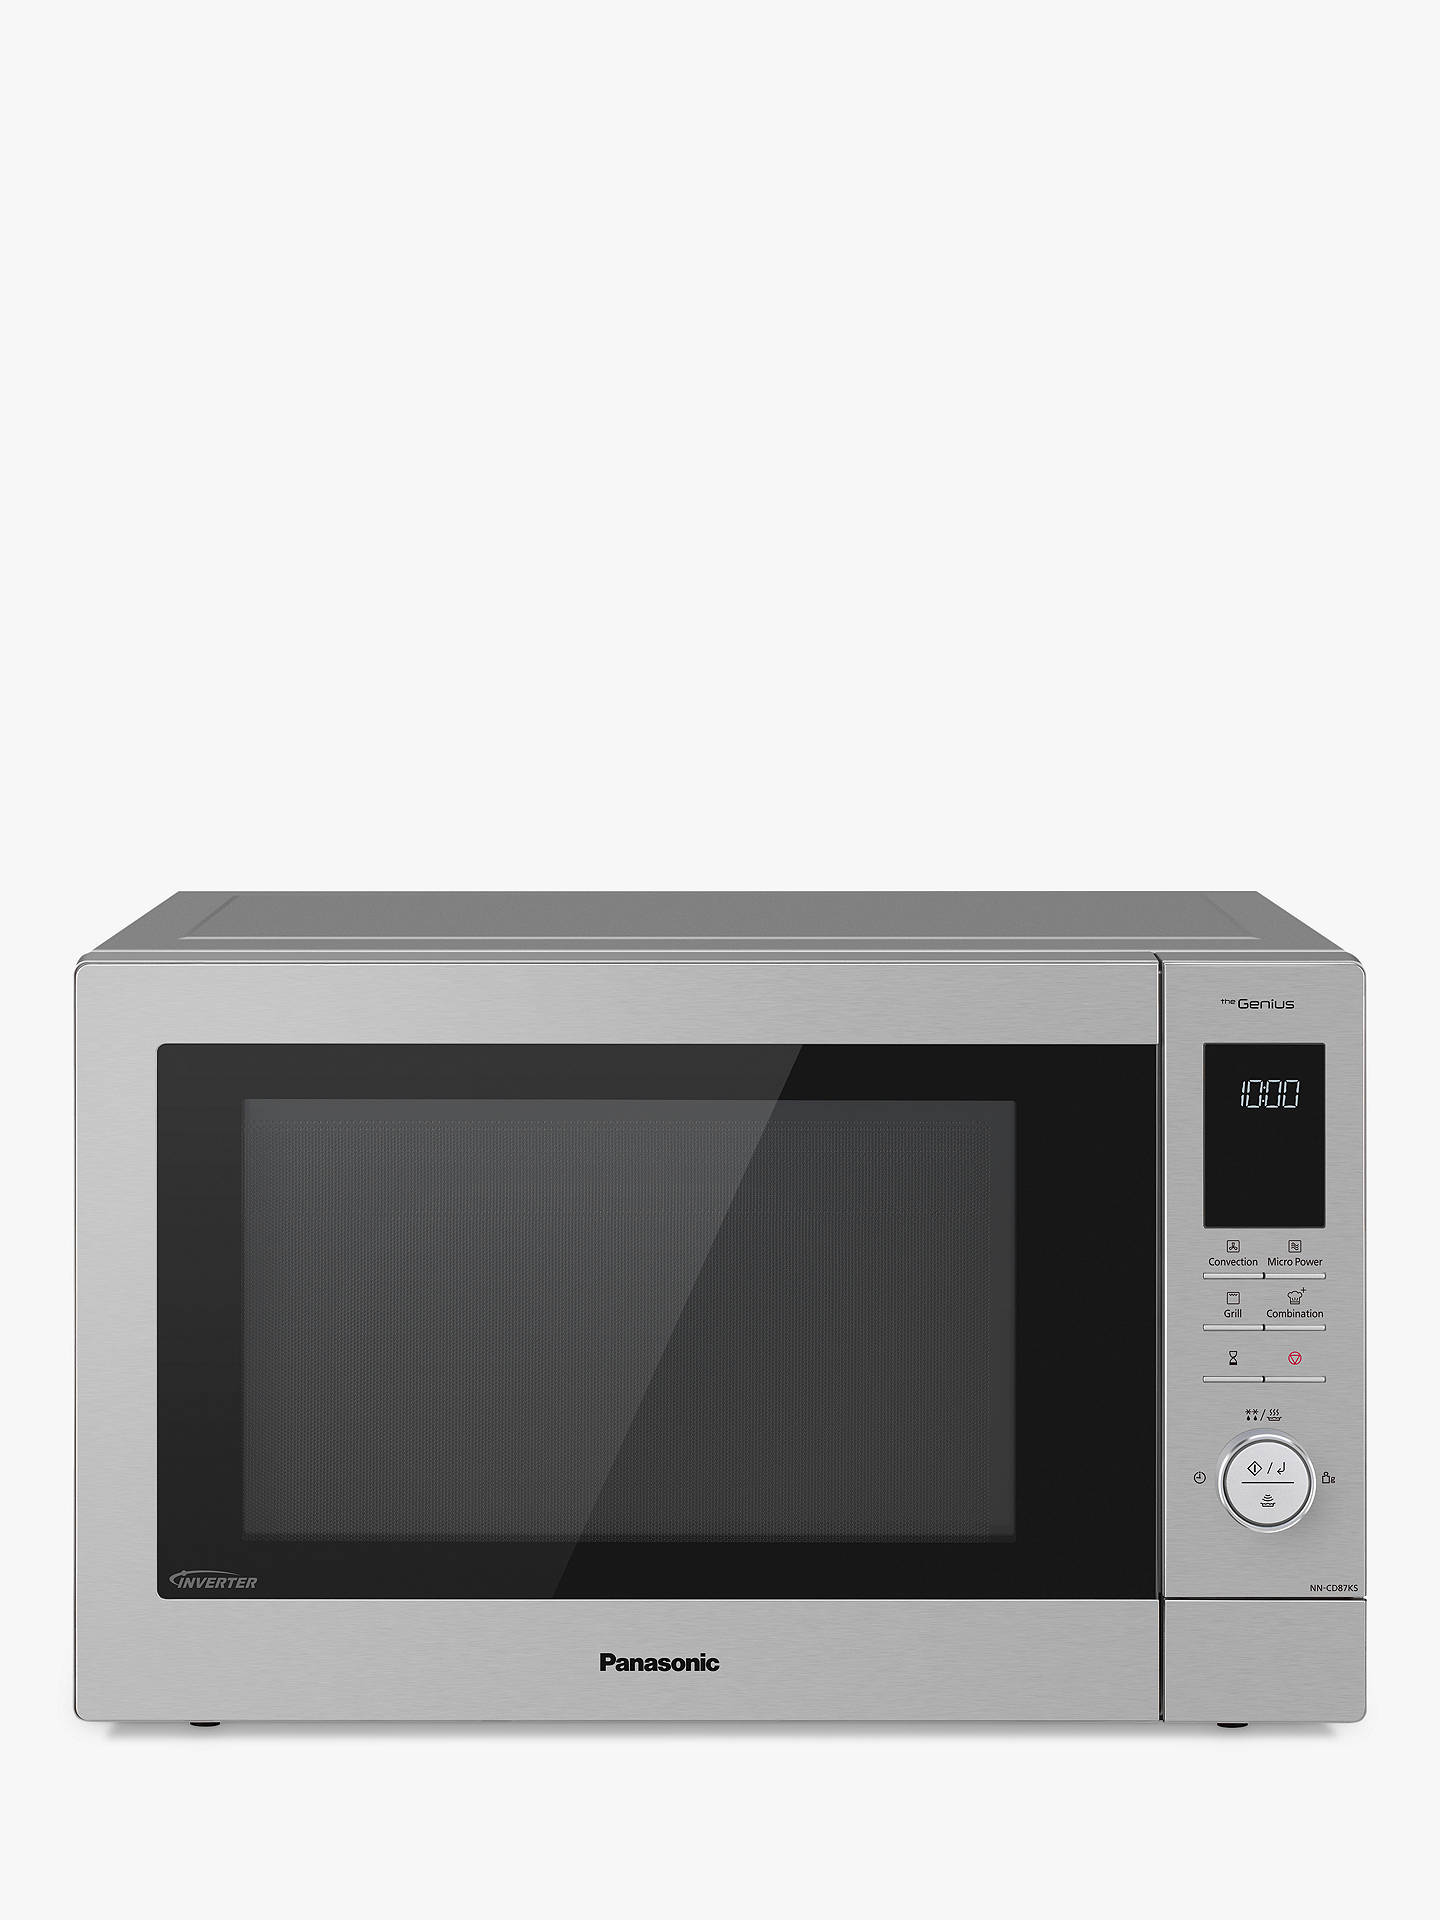 siemens combination microwave oven instructions